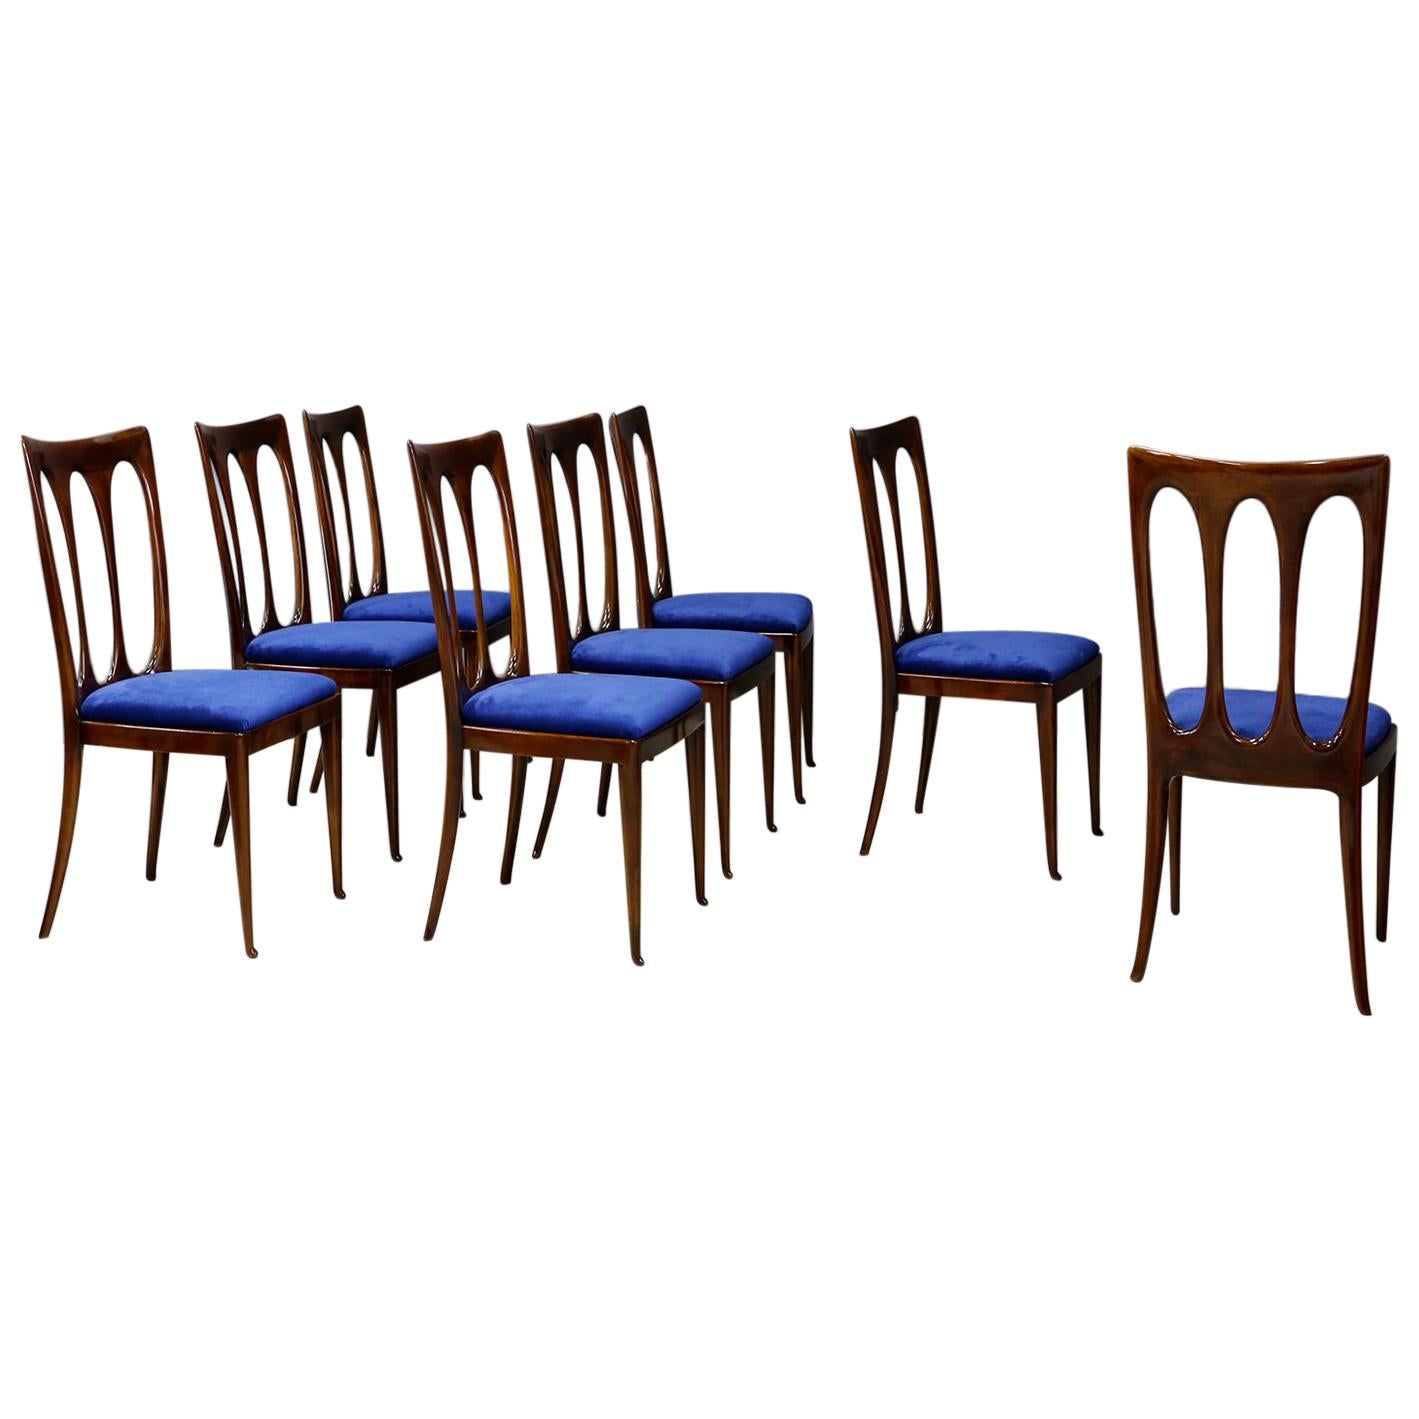 Set of Eight Midcentury Chairs by William Ulrich Restored in Blue Velvet, 1950s